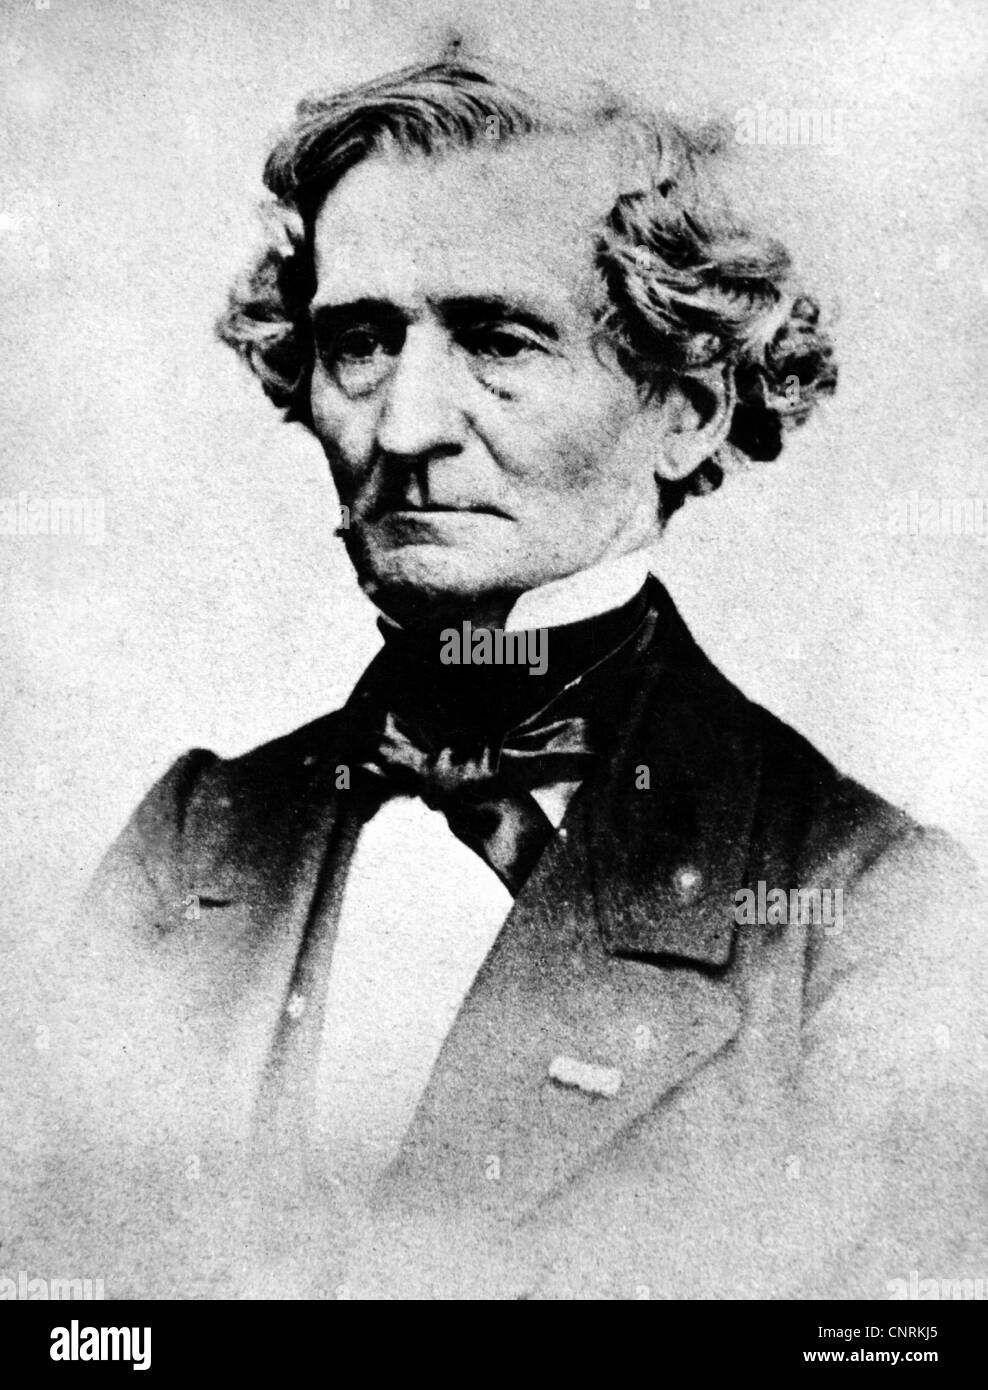 Berlioz, Hector Louis, 11.12.1803 - 8.3.1869, French composer, portrait, print after photography by Karl Reutlinger, 1864, , Stock Photo